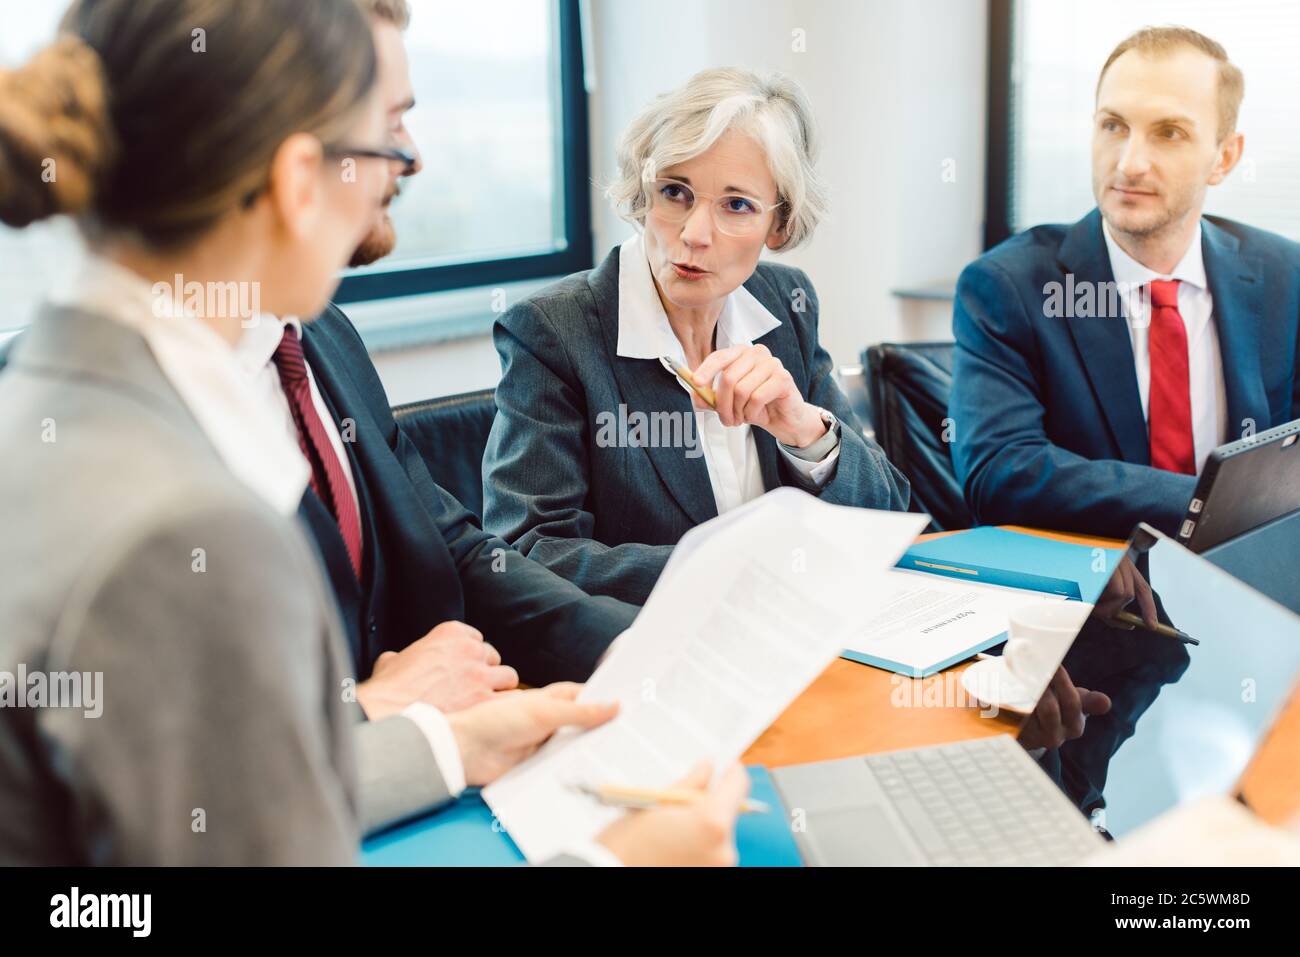 Experienced attorney with her team of professionals working Stock Photo